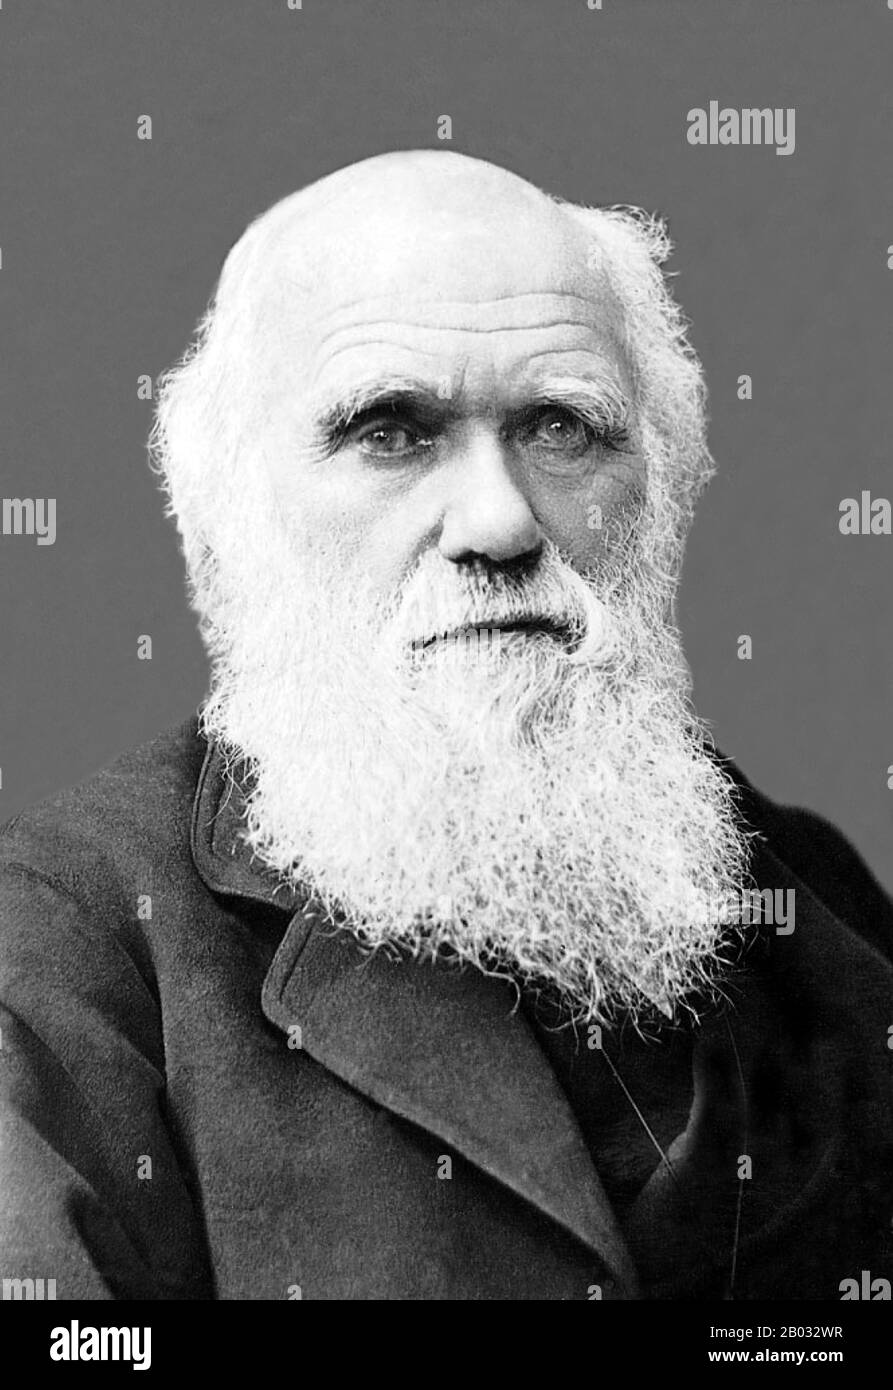 Charles Robert Darwin, FRS (12 February 1809 – 19 April 1882) was an English naturalist and geologist, best known for his contributions to evolutionary theory. He established that all species of life have descended over time from common ancestors, and in a joint publication with Alfred Russel Wallace introduced his scientific theory that this branching pattern of evolution resulted from a process that he called natural selection, in which the struggle for existence has a similar effect to the artificial selection involved in selective breeding.  Darwin published his theory of evolution with co Stock Photo